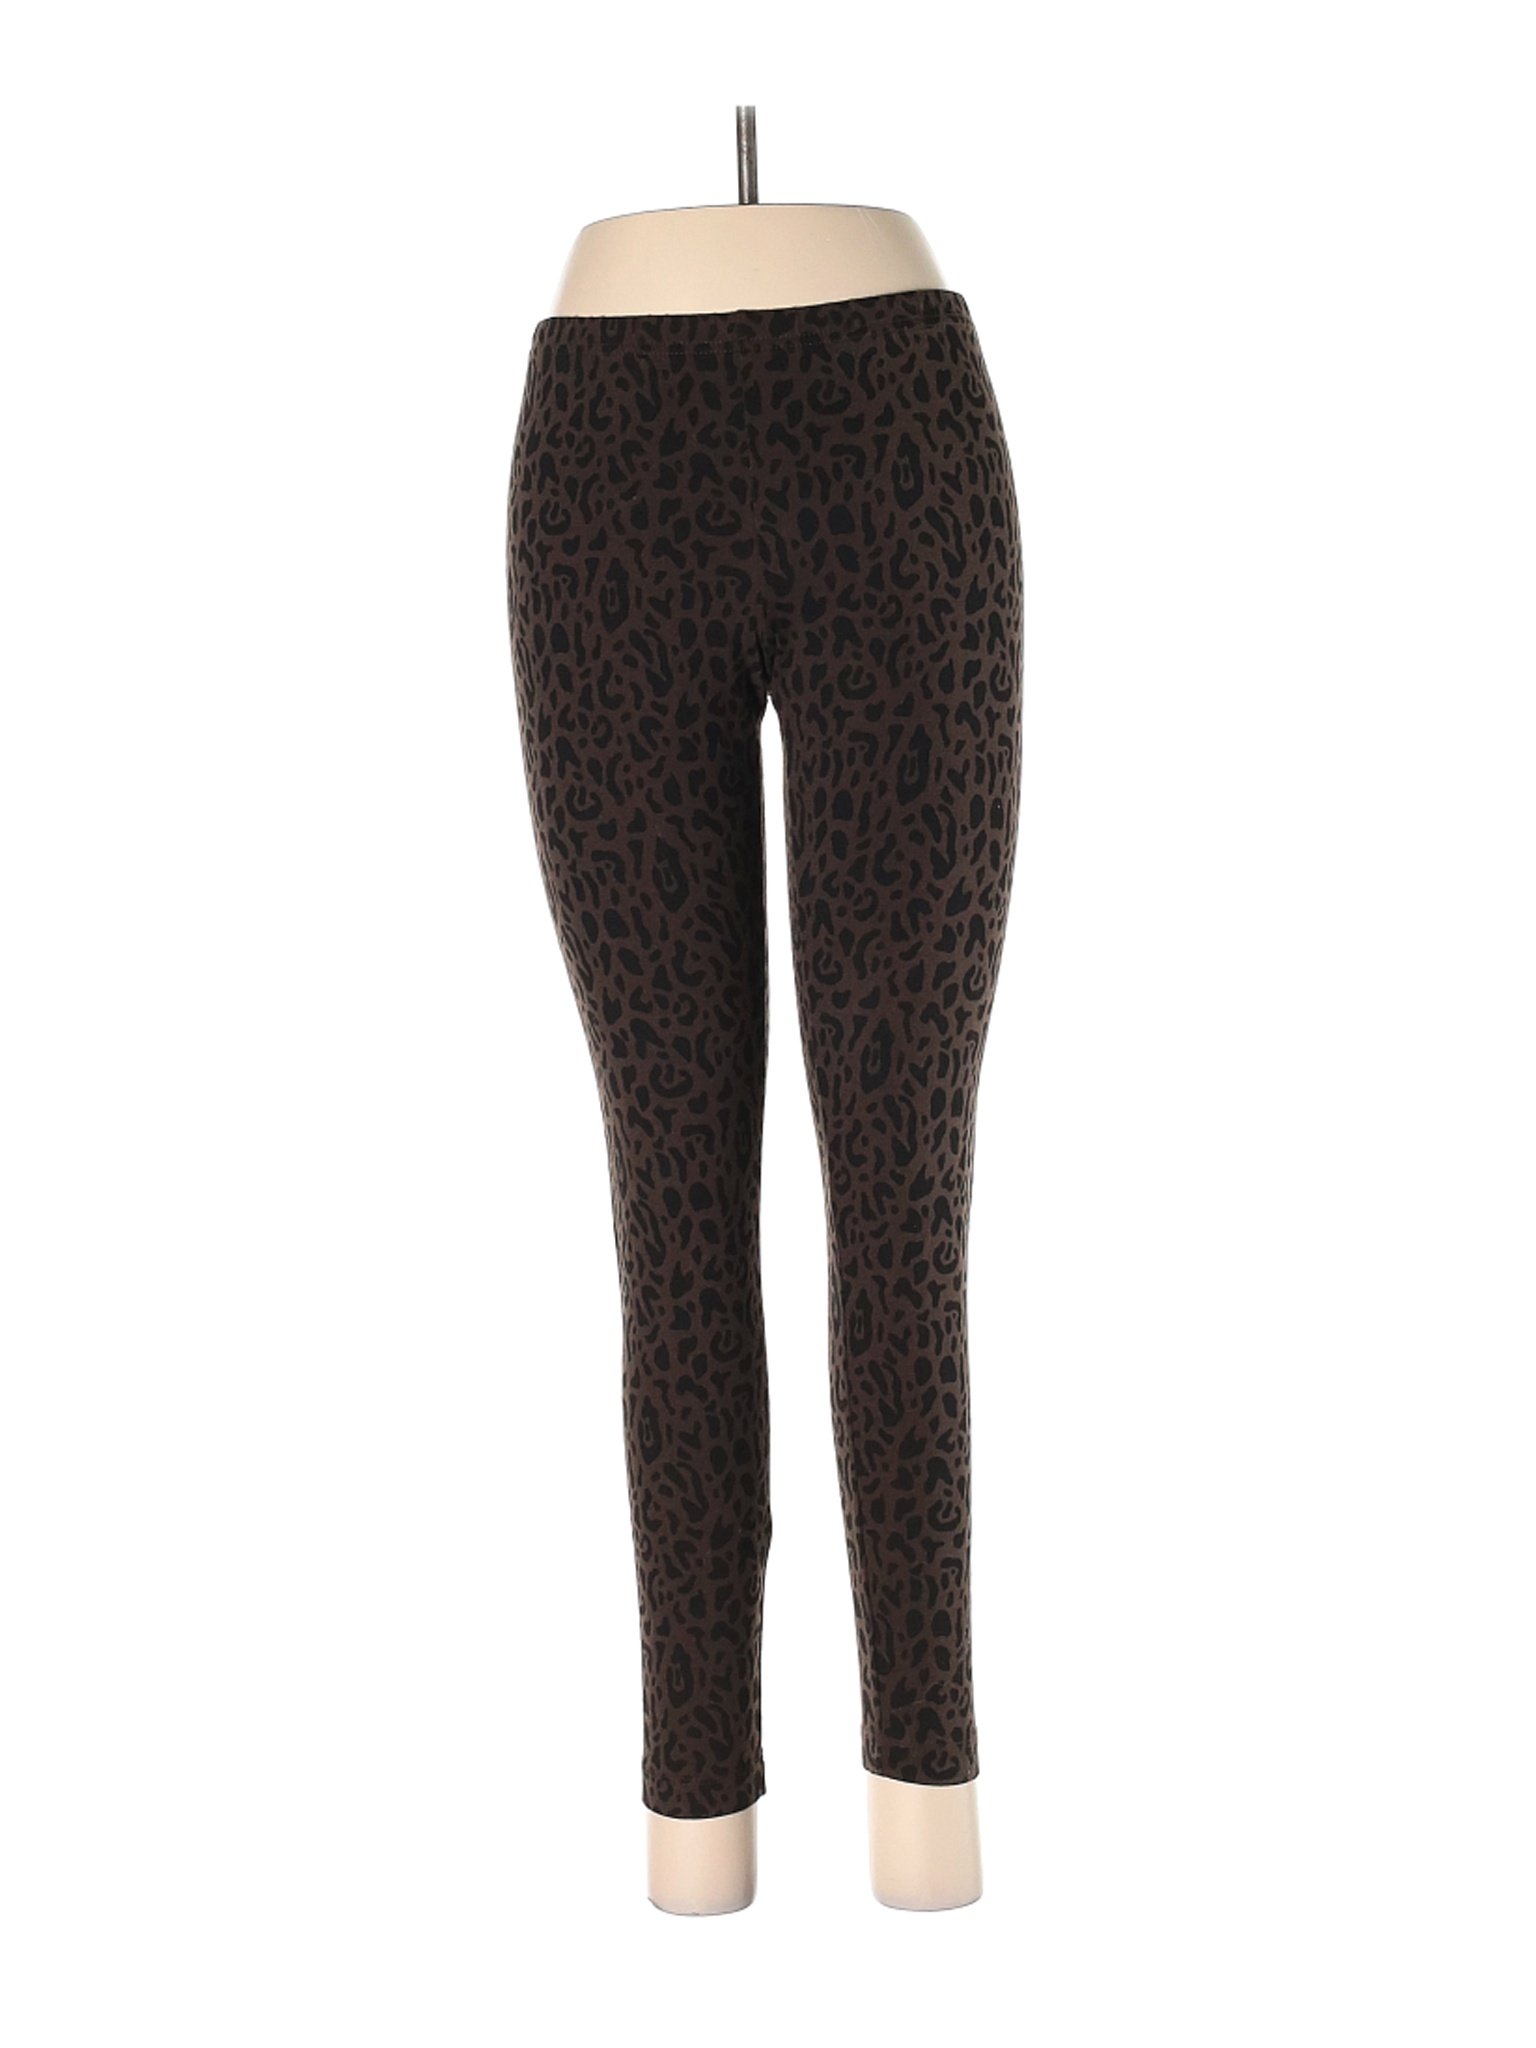 Wild Fable Women's Leopard Print High-Waisted Classic Leggings Size XL